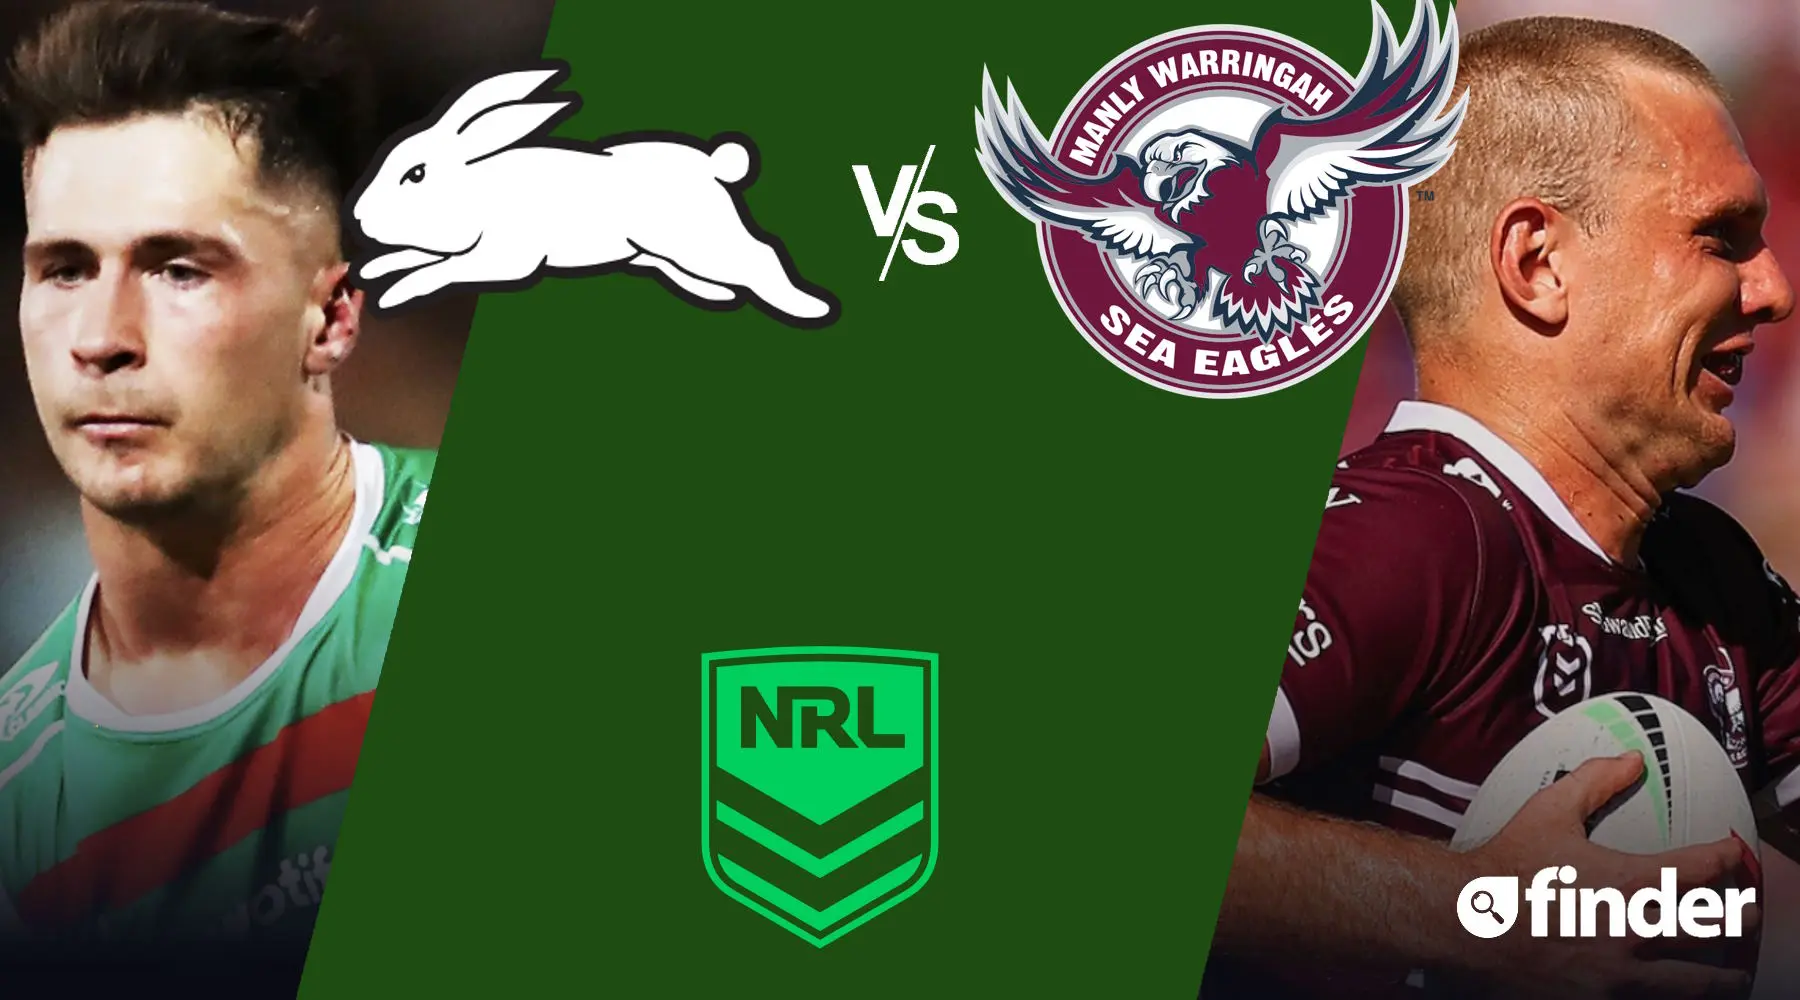 How to watch Rabbitohs vs Manly NRL live and match preview